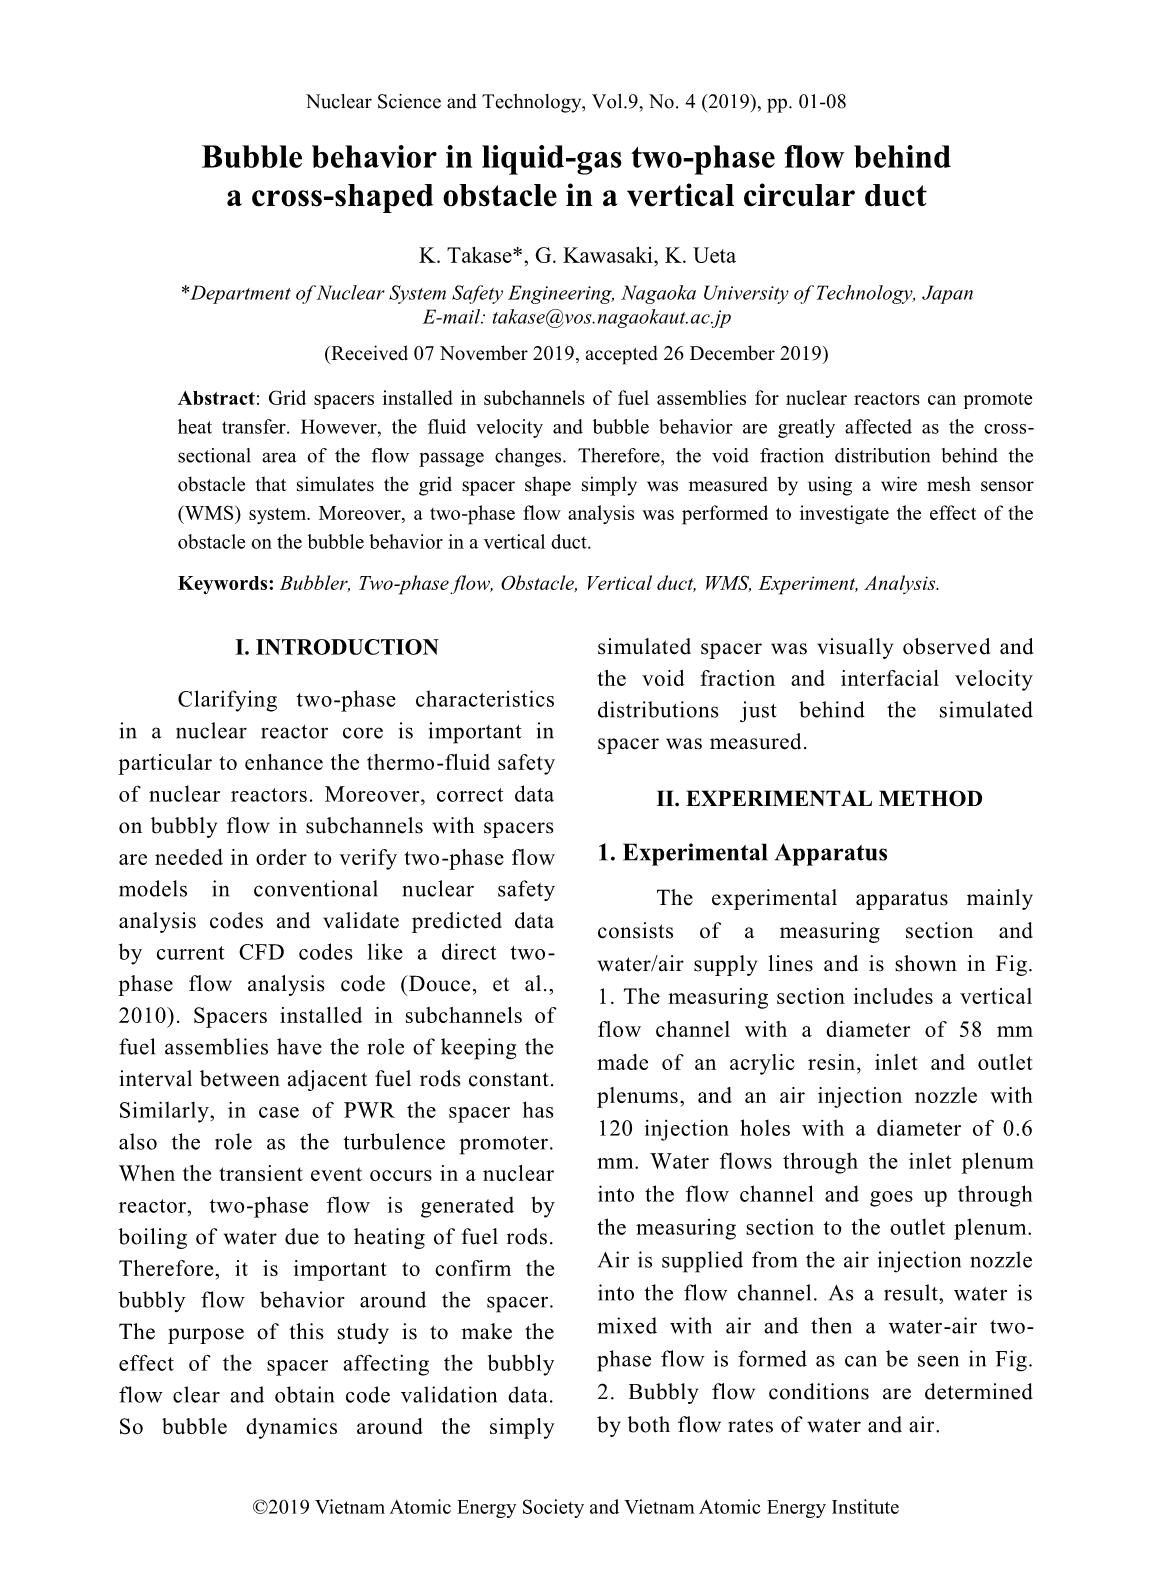 Nuclear Science and Technology - Volume 9, Number 4, December 2019 trang 4